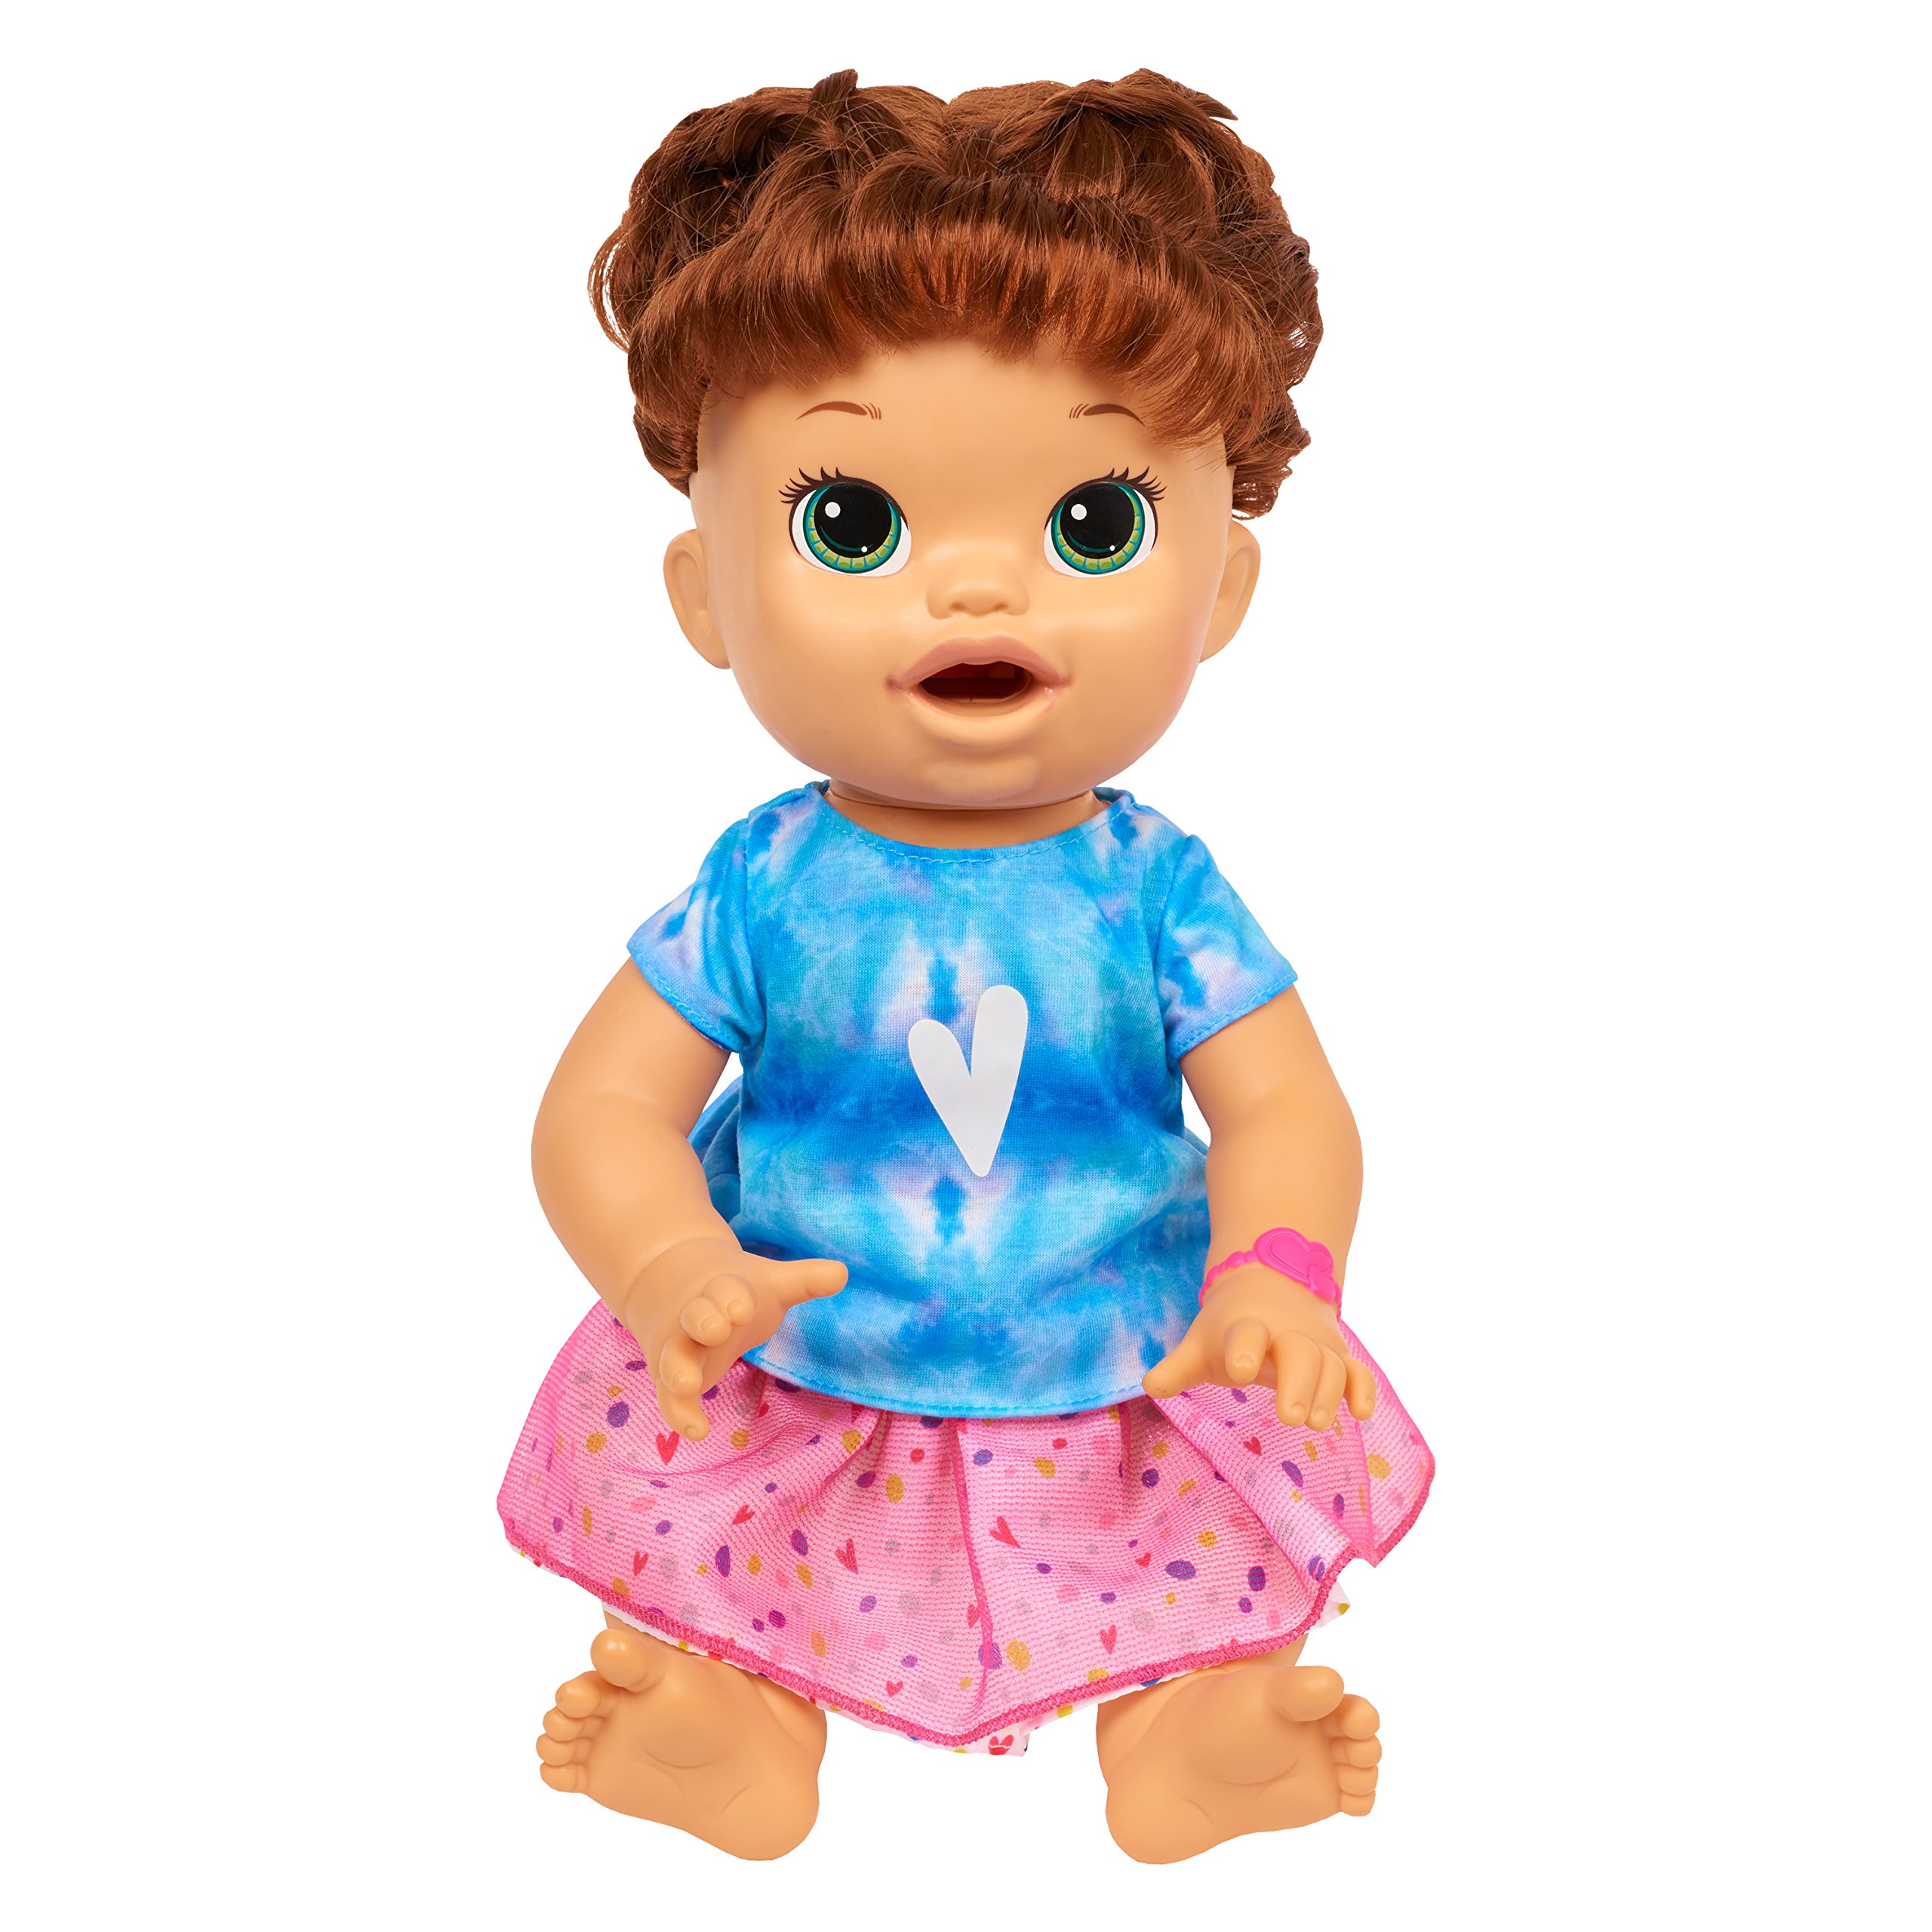 Baby Alive Mix N' Match Outfit Set, Kids Toys for Ages 3 Up, Gifts and Presents by Just Play